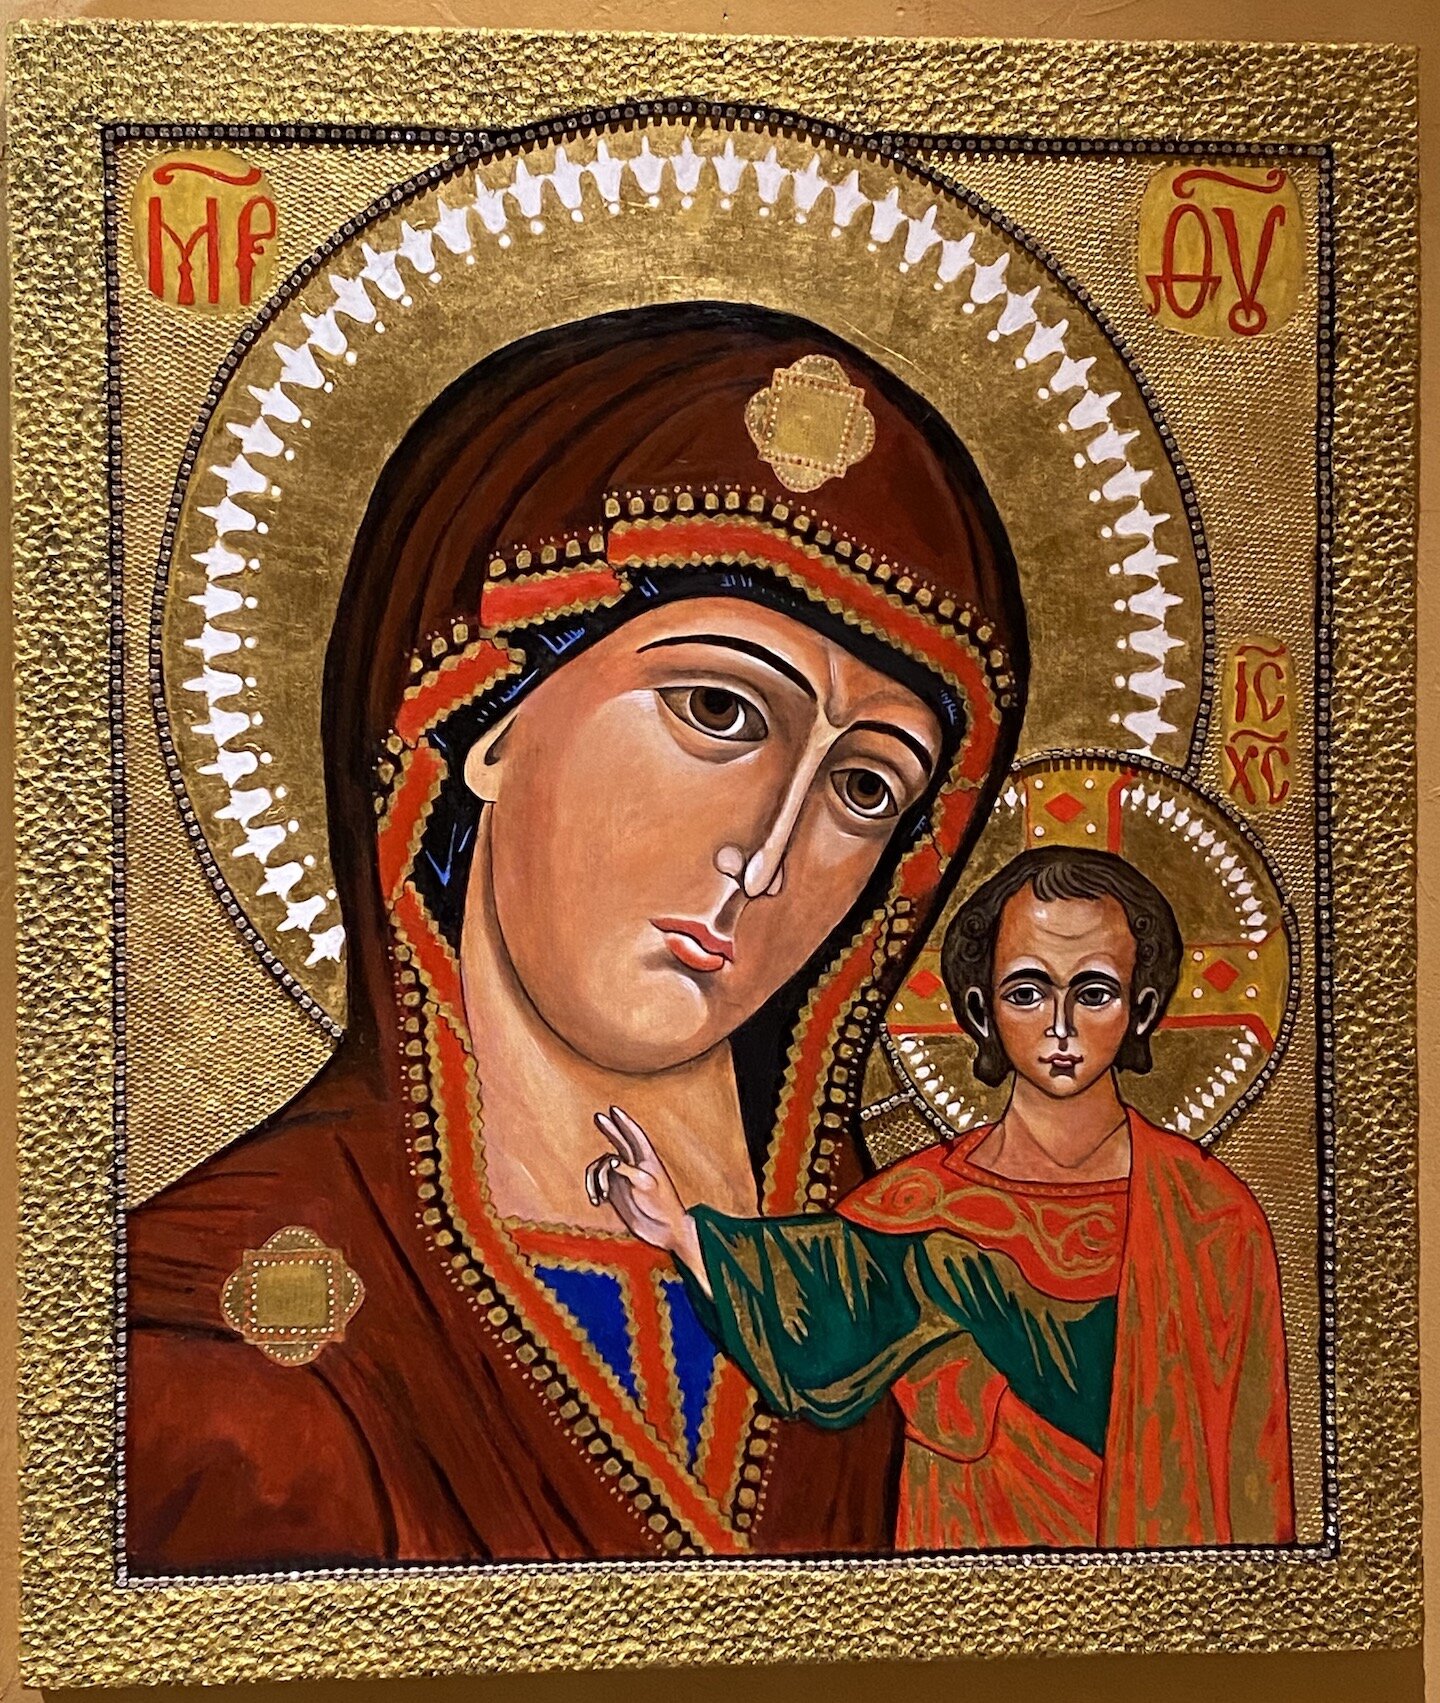   Icons  by Gaudin   Madonna and Child  , 30” x 30”, oil, gold leaf, crystals on wood 